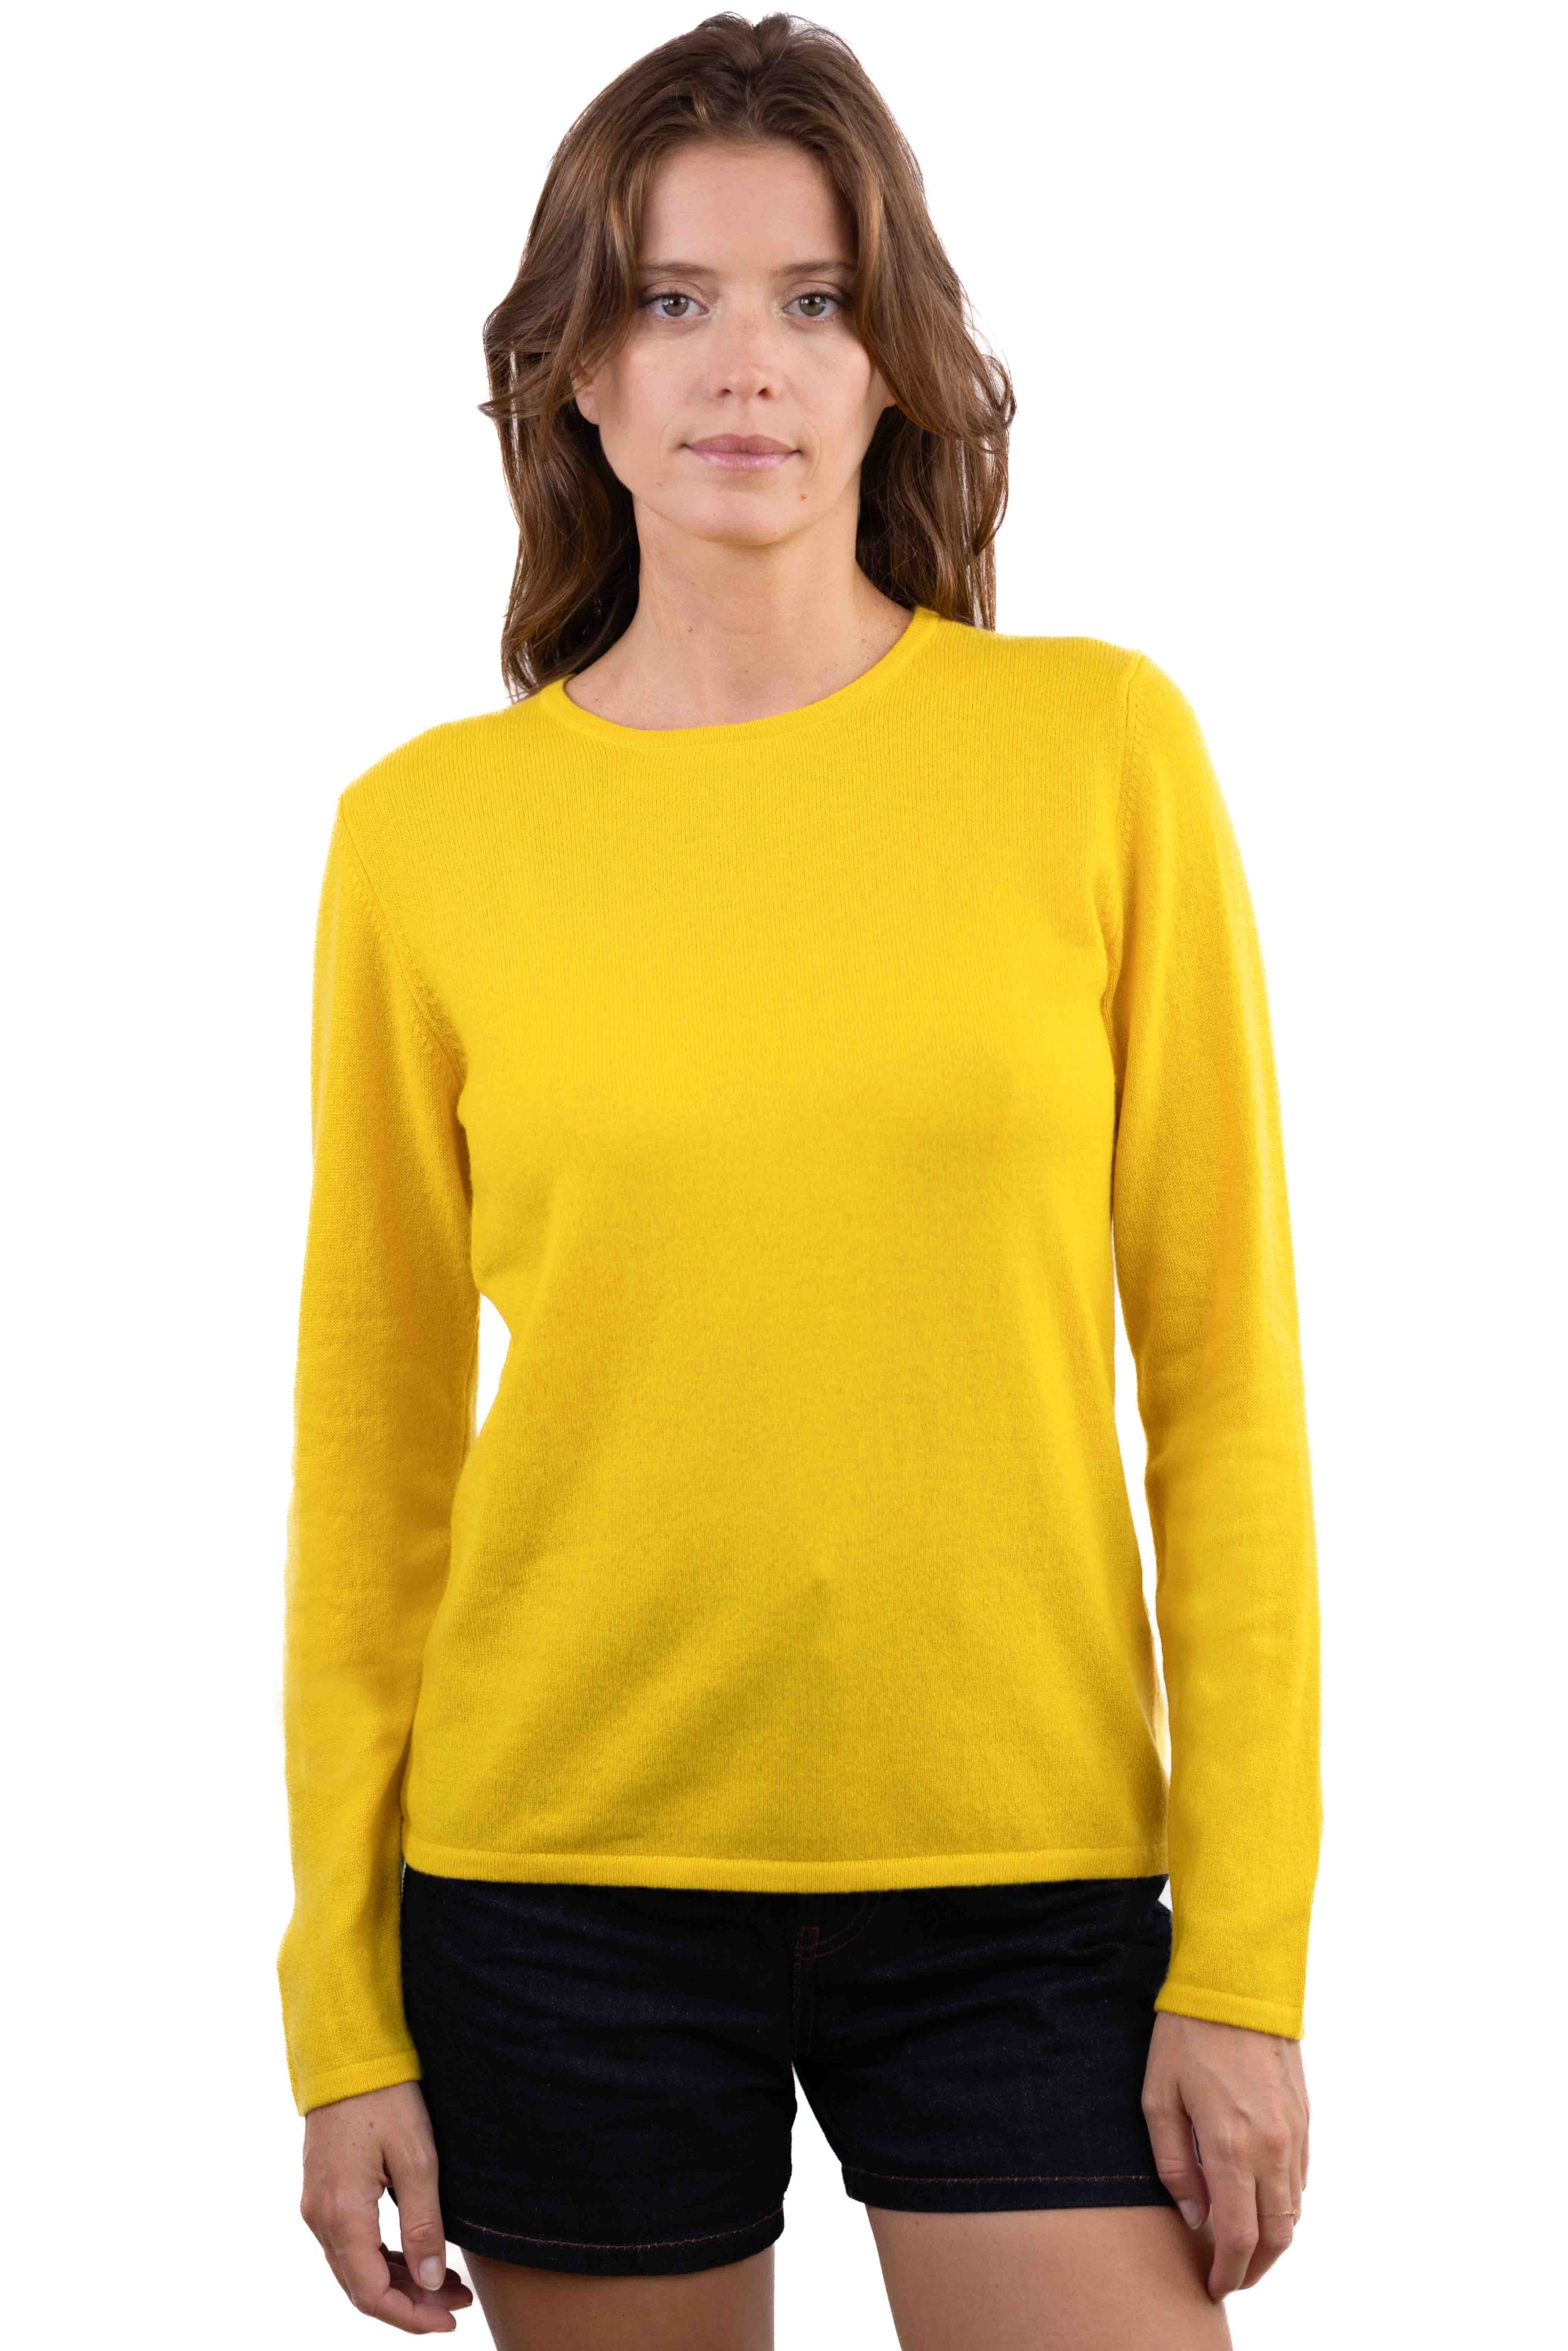 Cashmere ladies line cyber yellow l